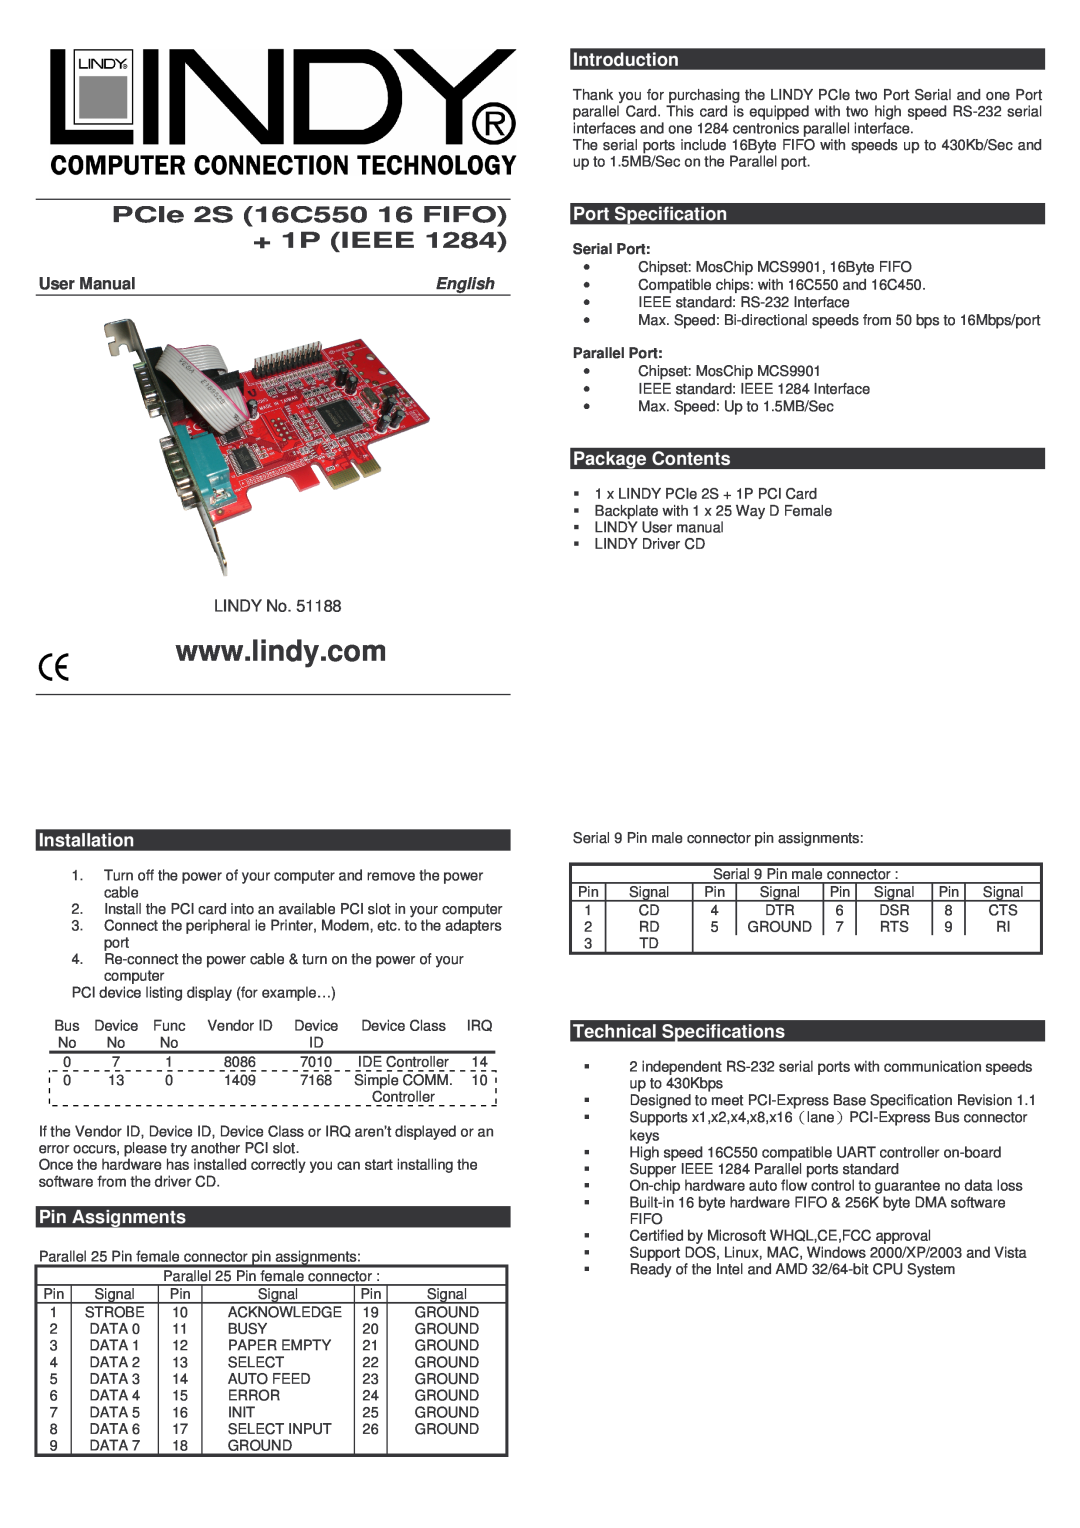 Lindy 51188 technical specifications Installation, Pin Assignments, Introduction, Port Specification, Package Contents 